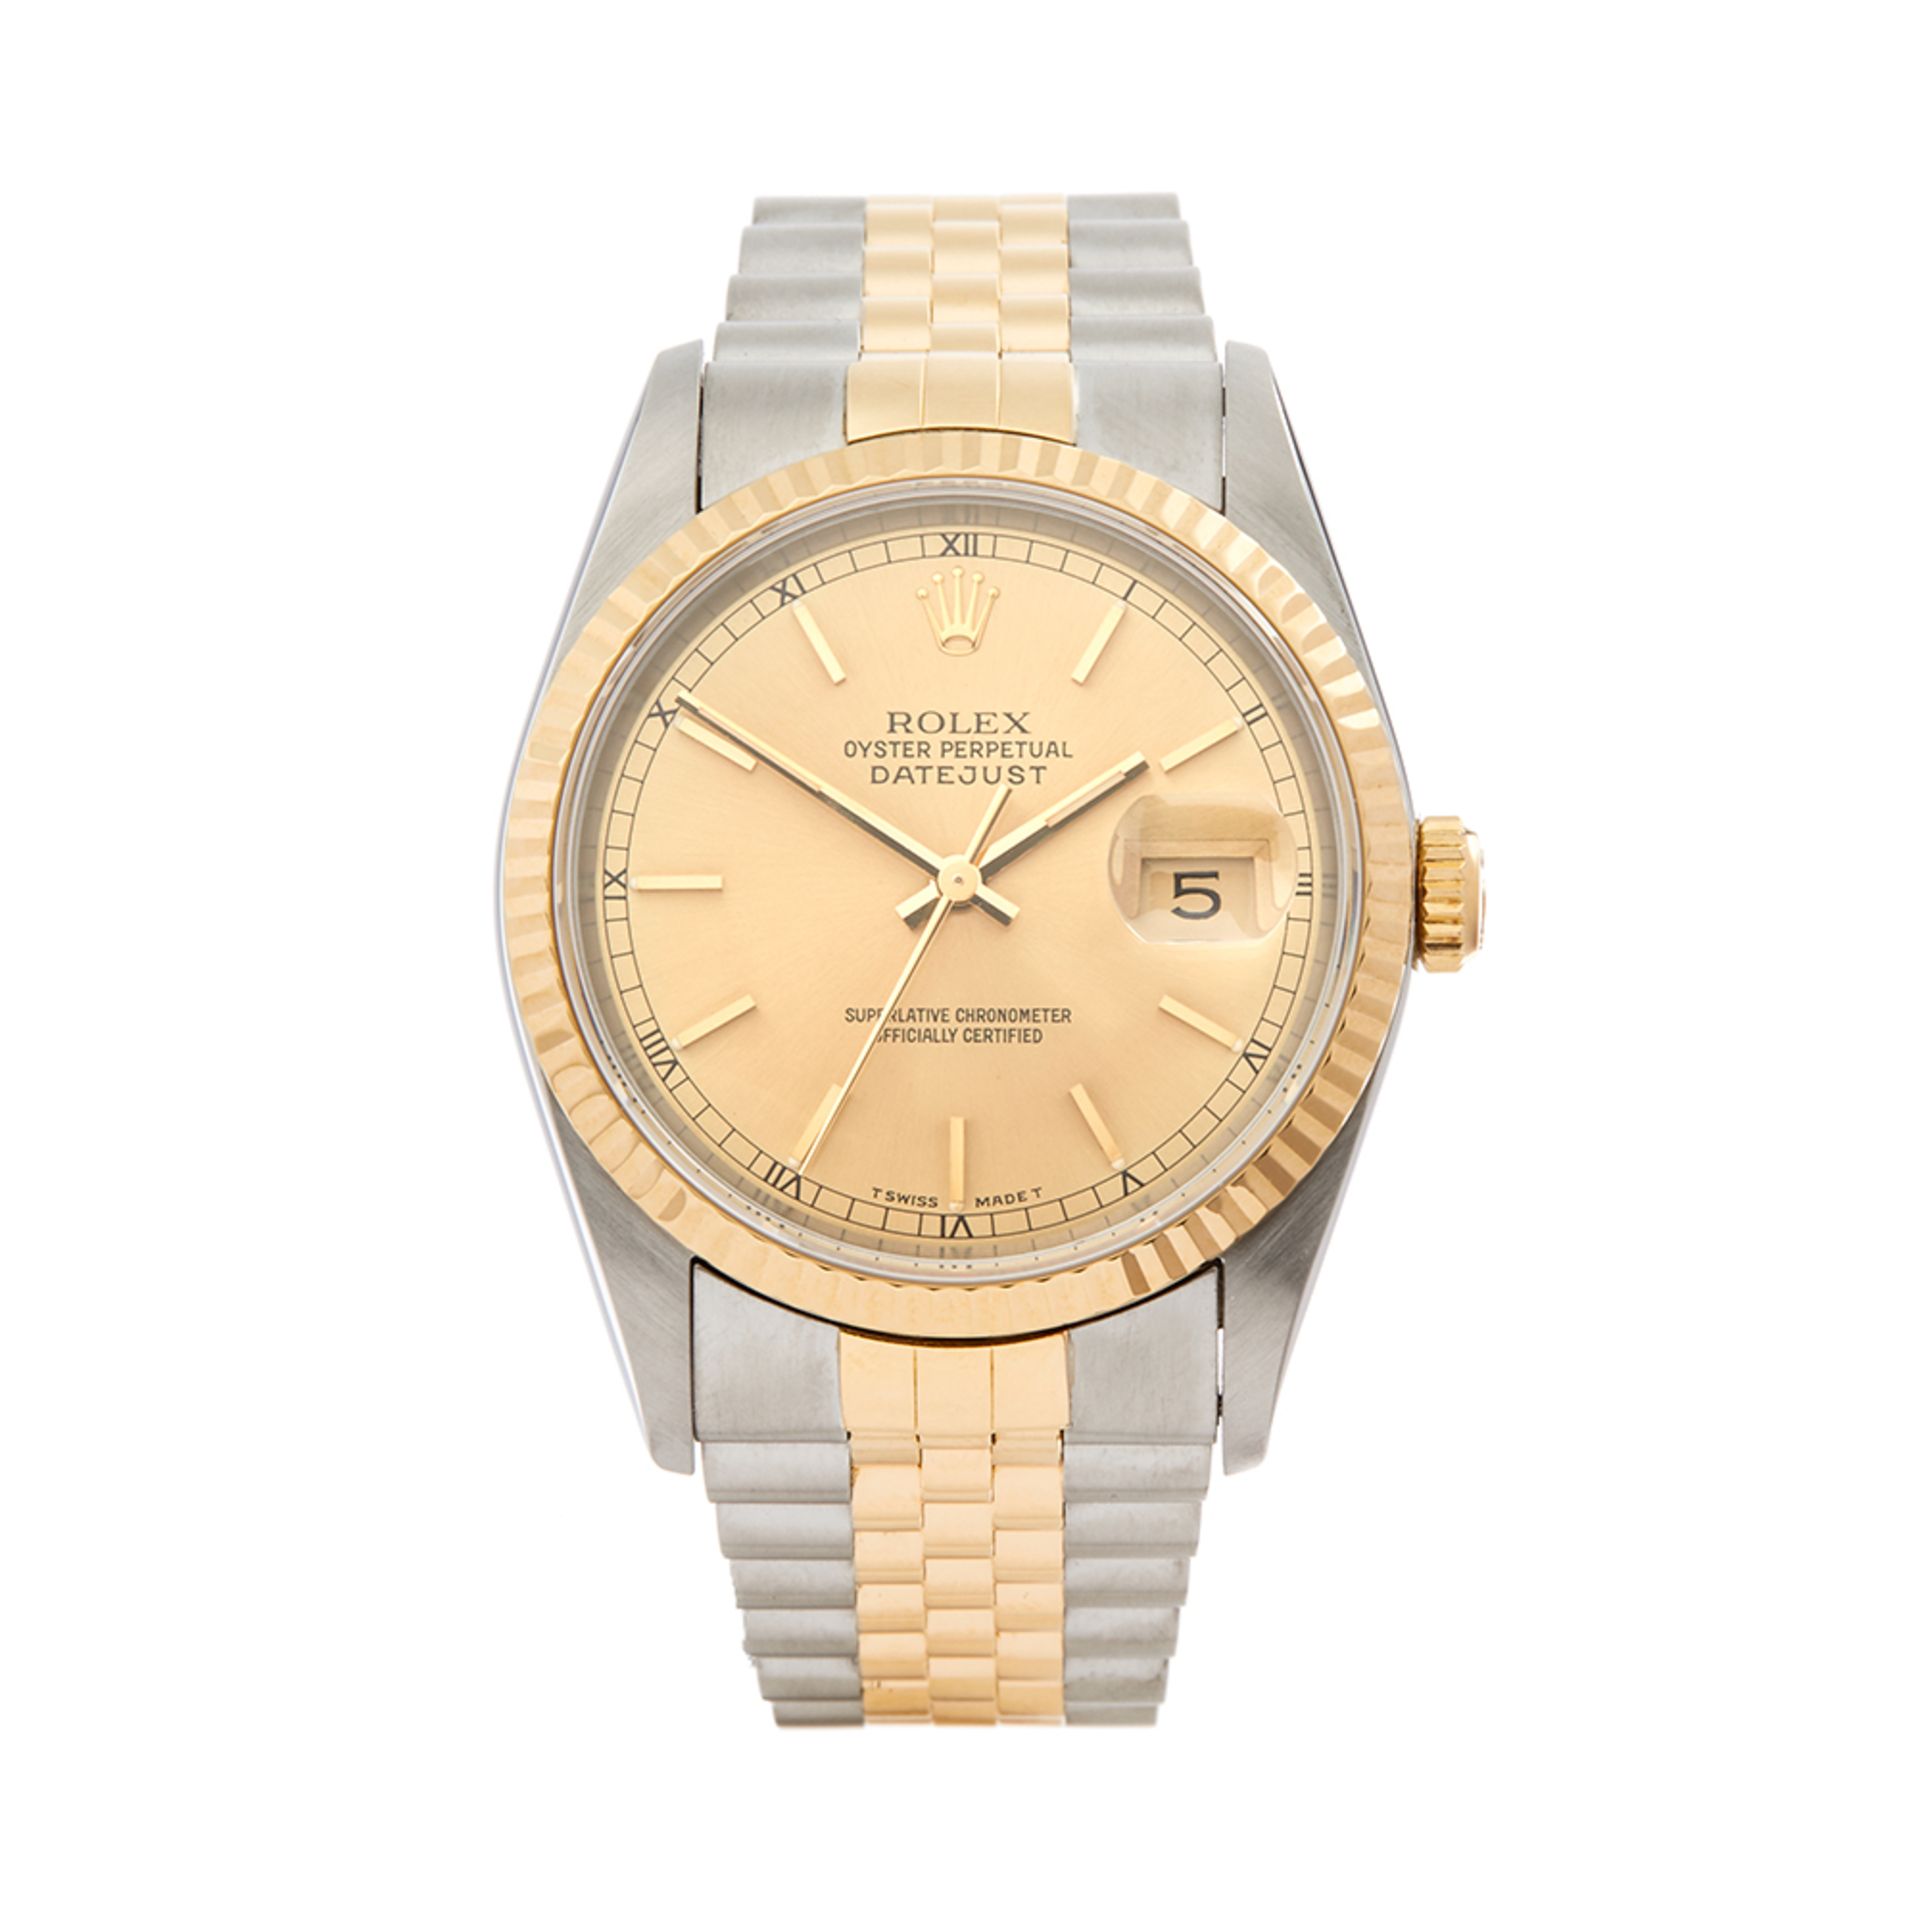 Rolex Datejust 36 Stainless Steel & 18K Yellow Gold - 16233 - Image 2 of 7